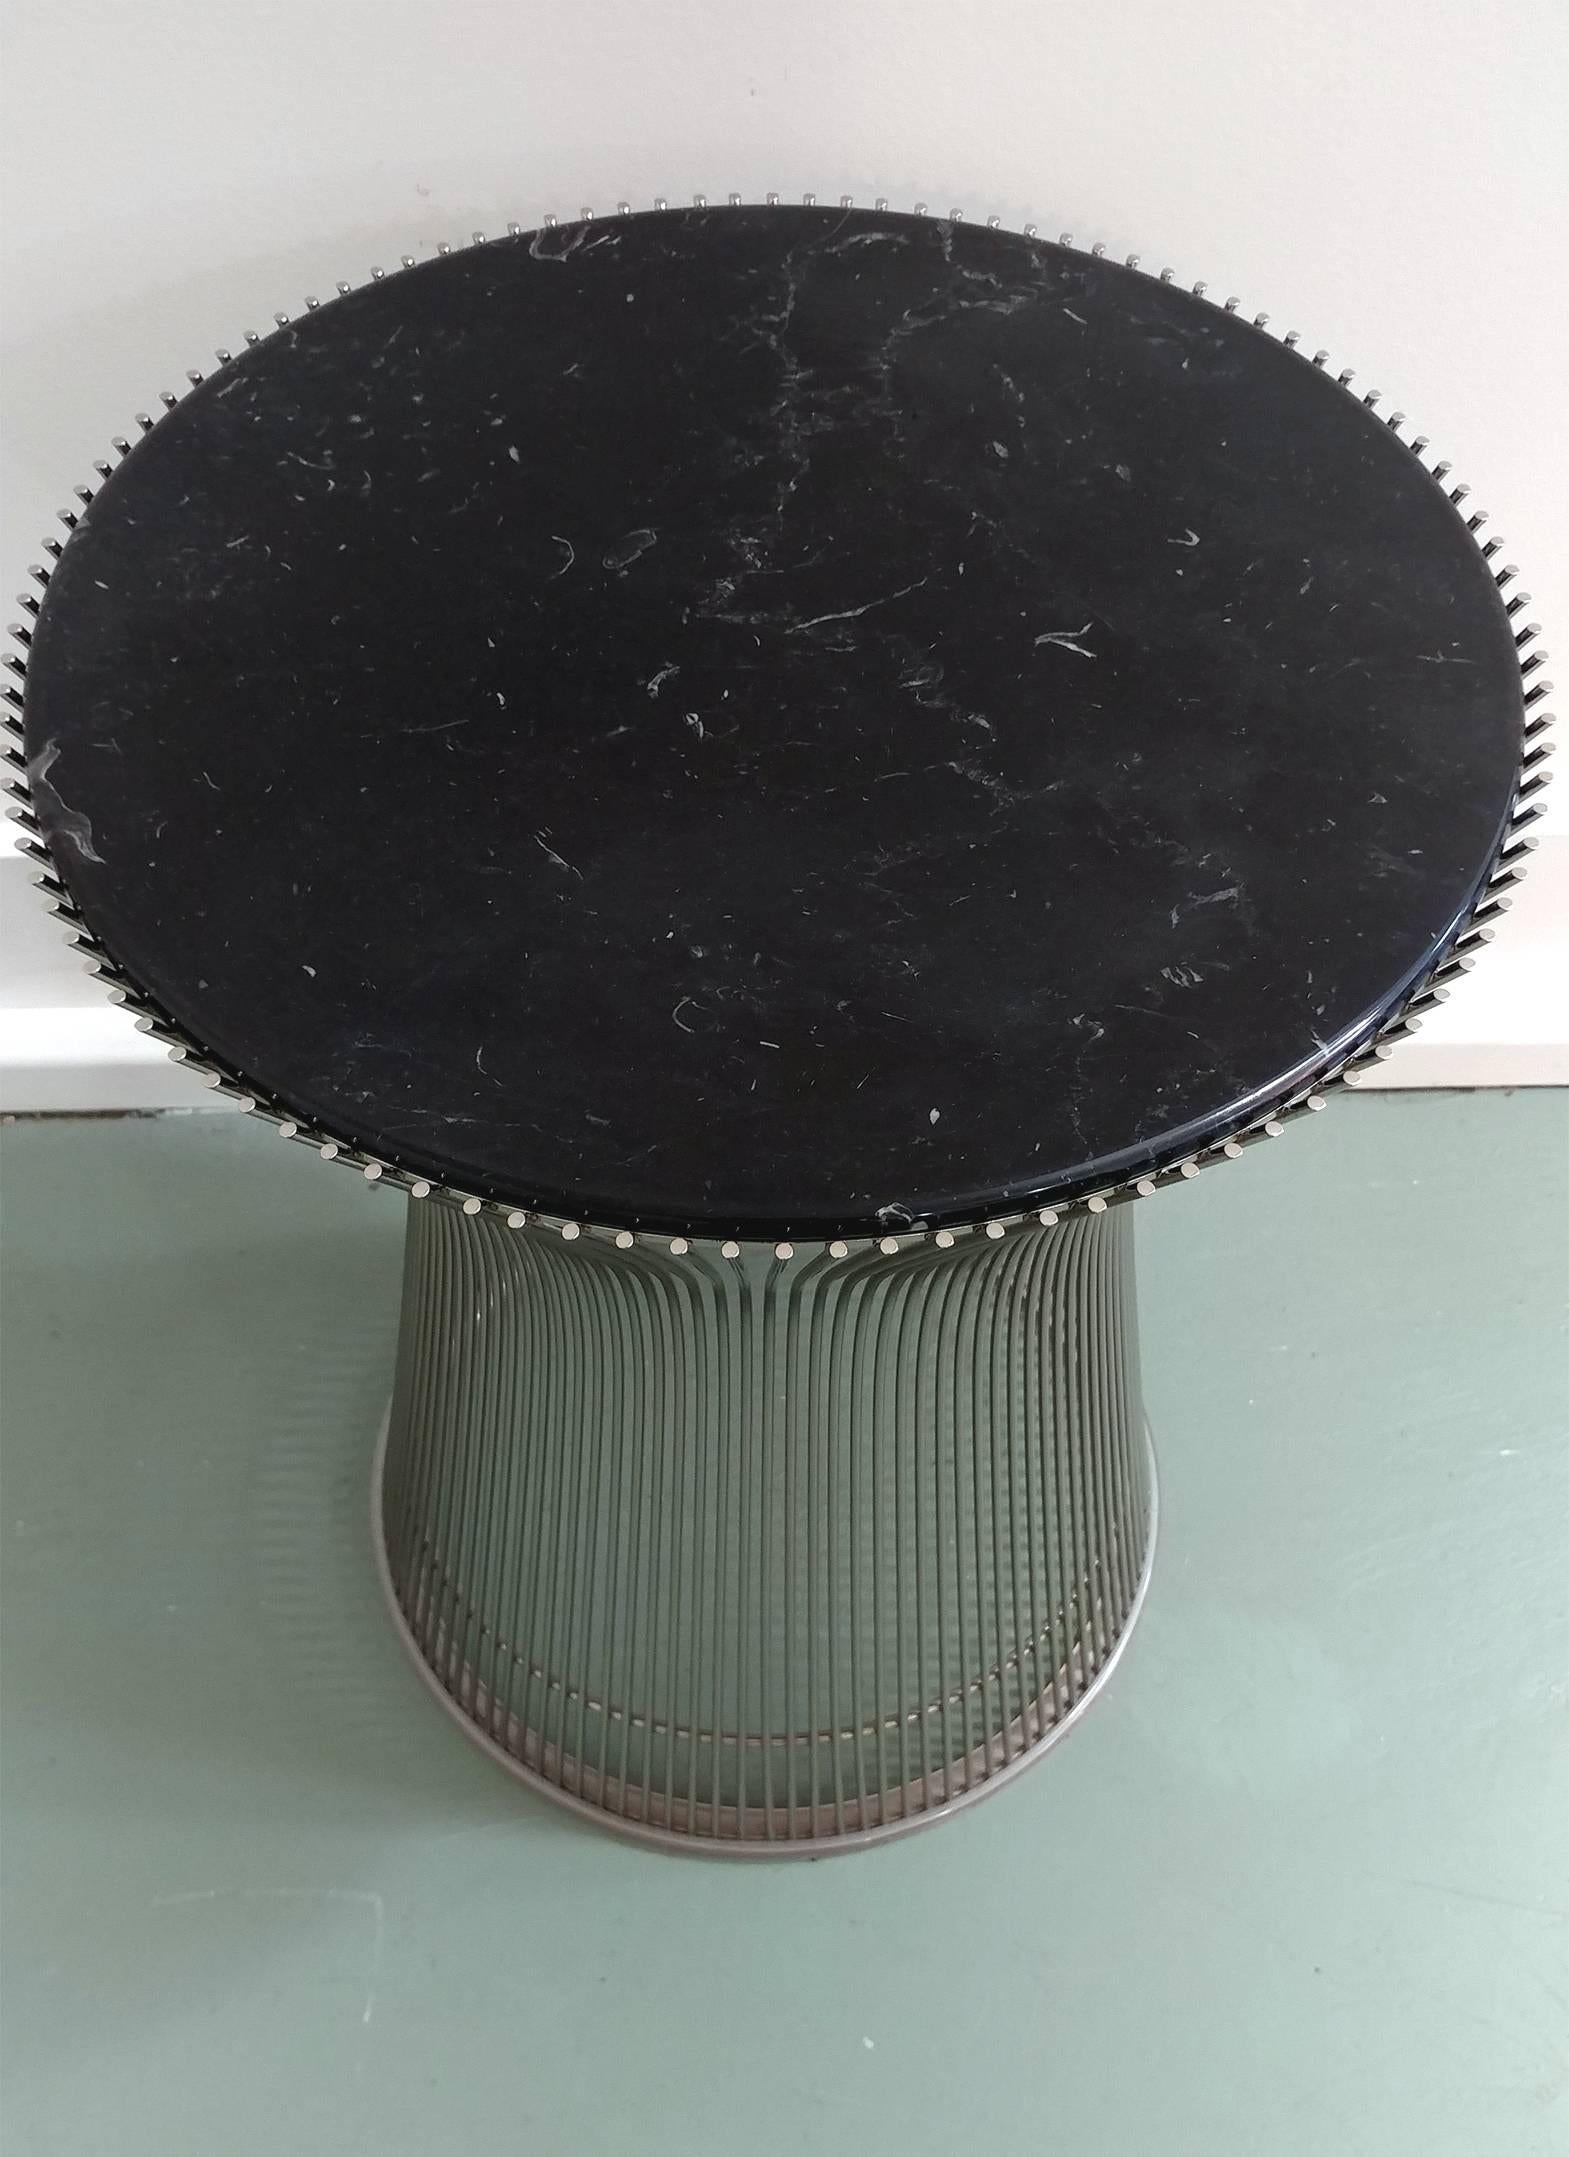 Mid-Century Modern Marble Top Sculpture Table by Warren Platner for Knoll Offered by Laporte